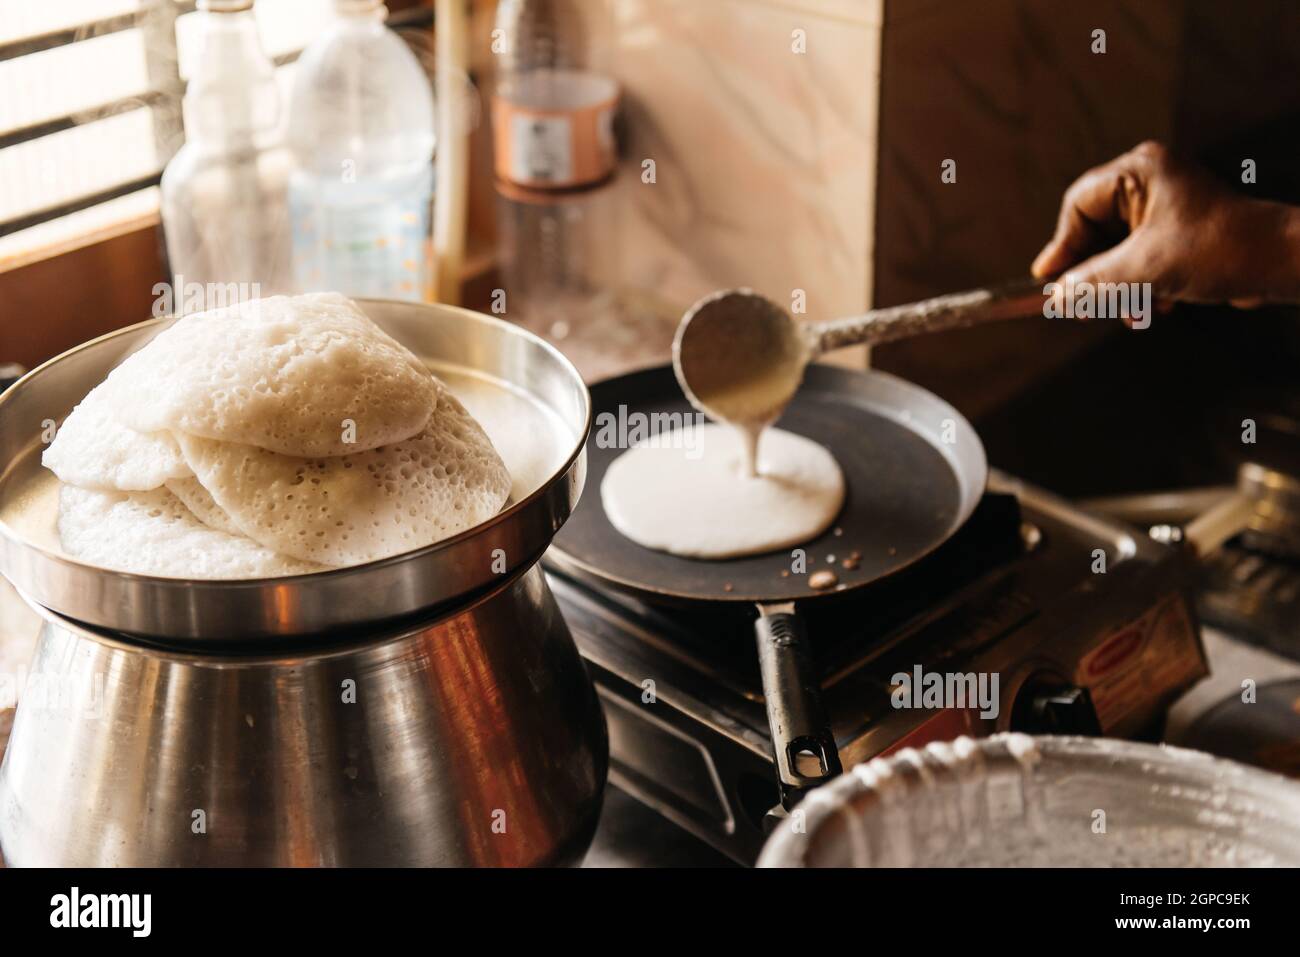 Idli or idly, savory rice cake from India, breakfast foods on South. Woman cooking at home, hot food with steam Stock Photo